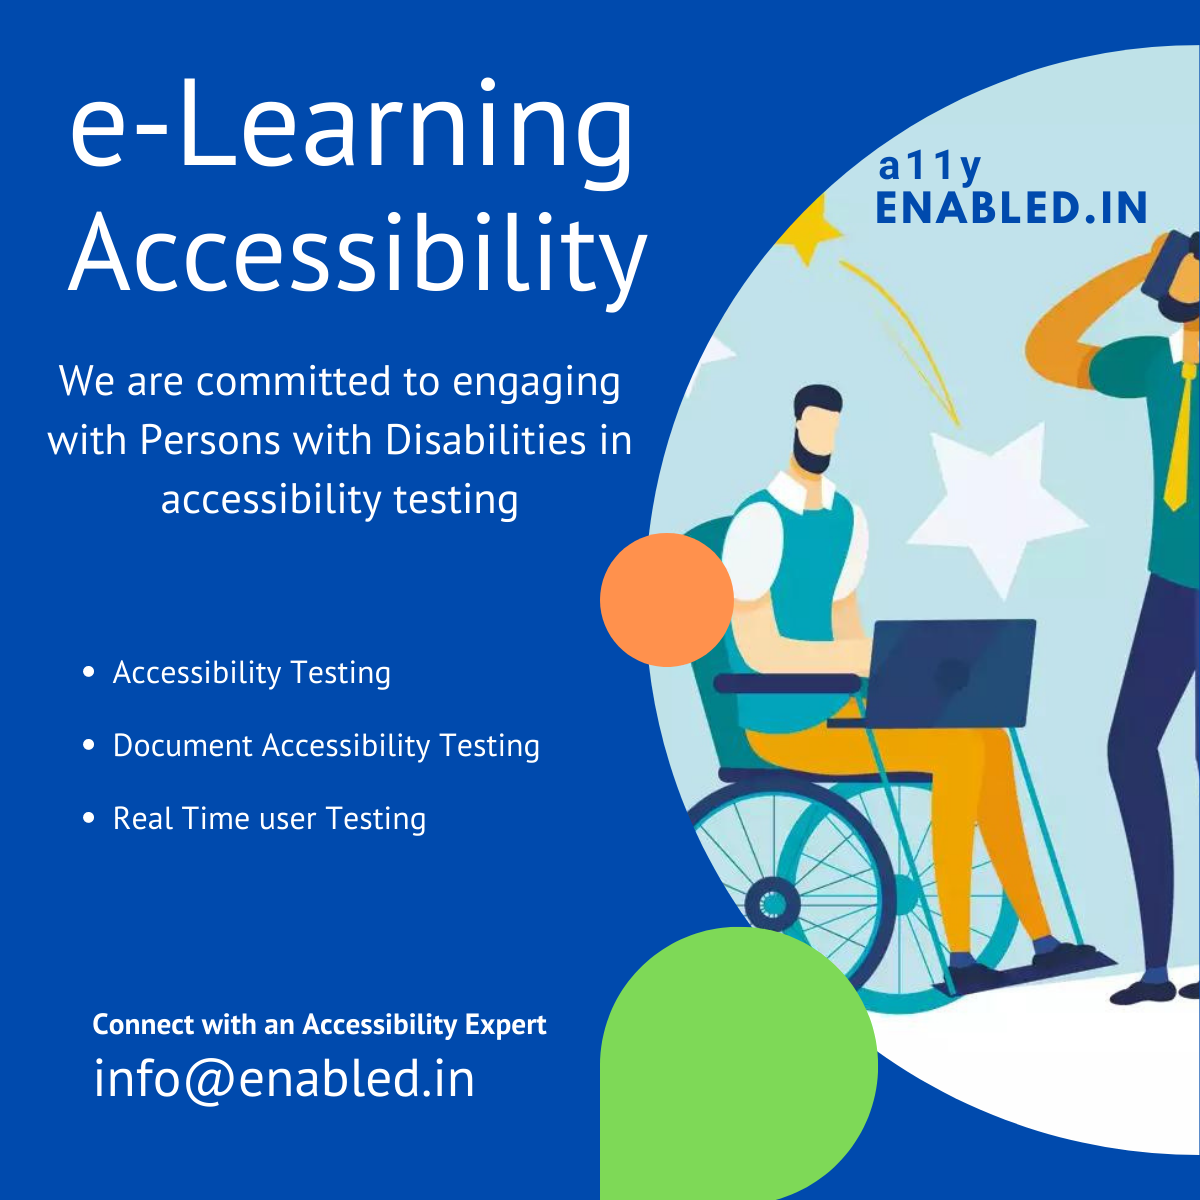 e-Learning Accessibility services